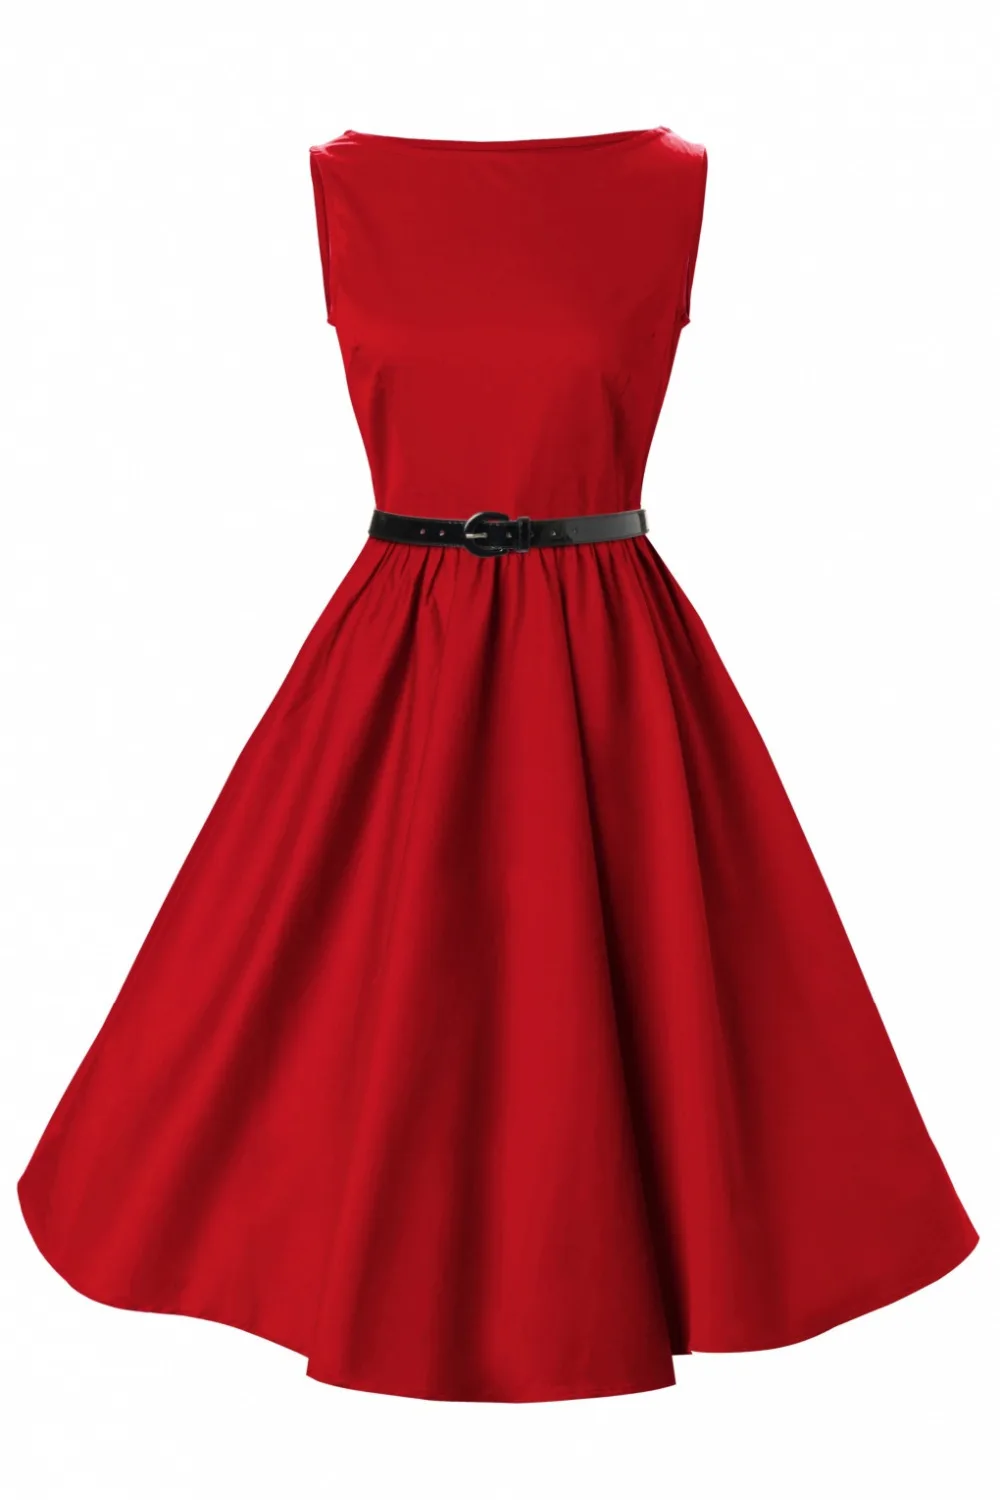 Clothing stores online ladies red dresses